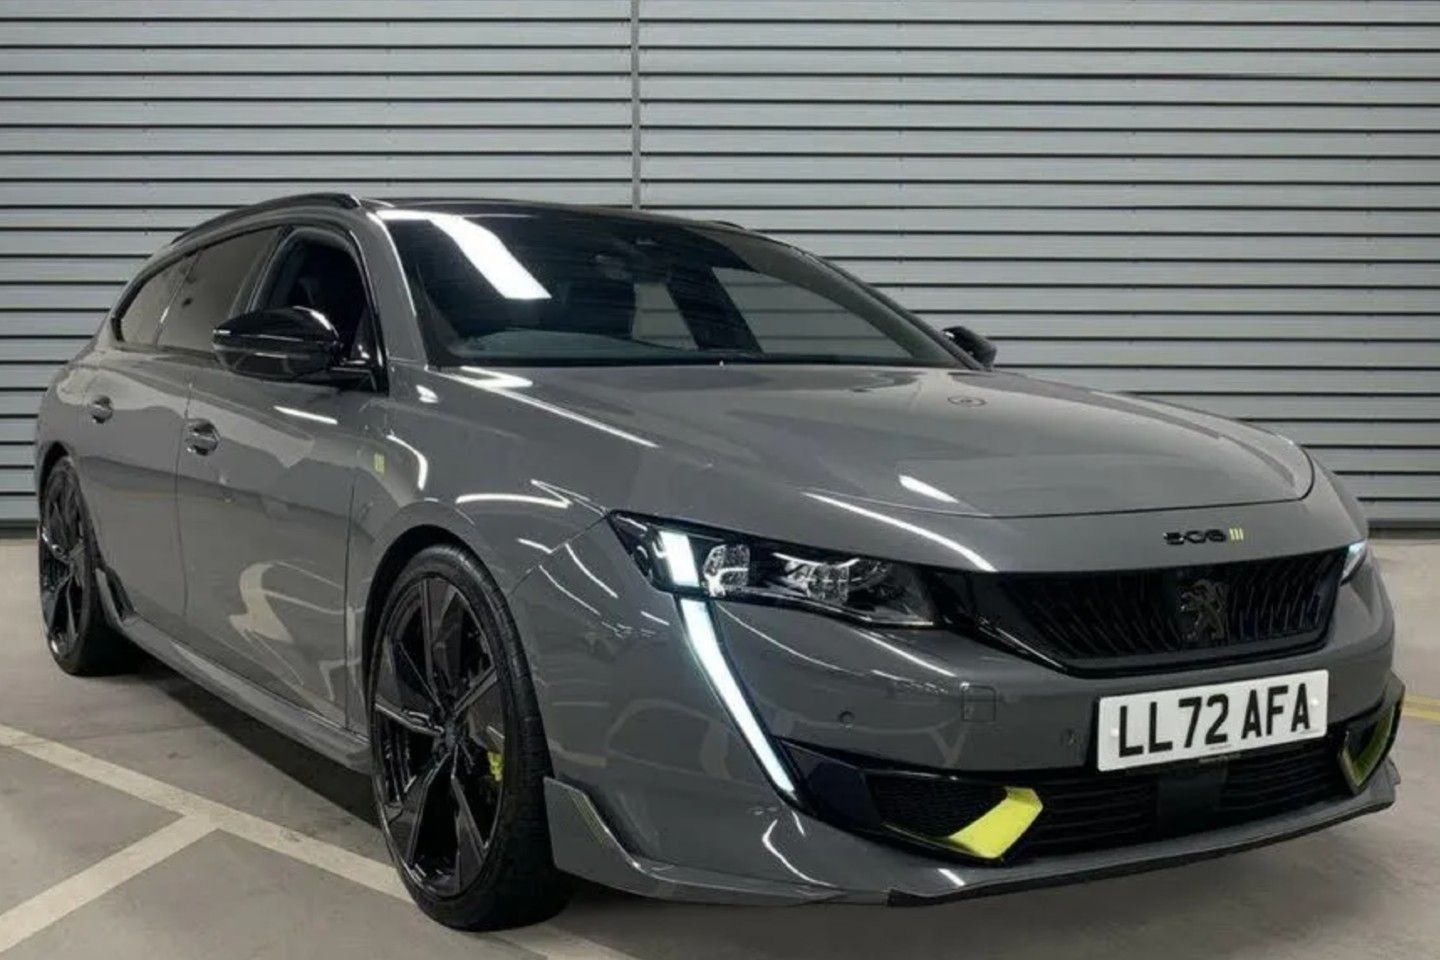 Pricing announced for 2022 Peugeot 508